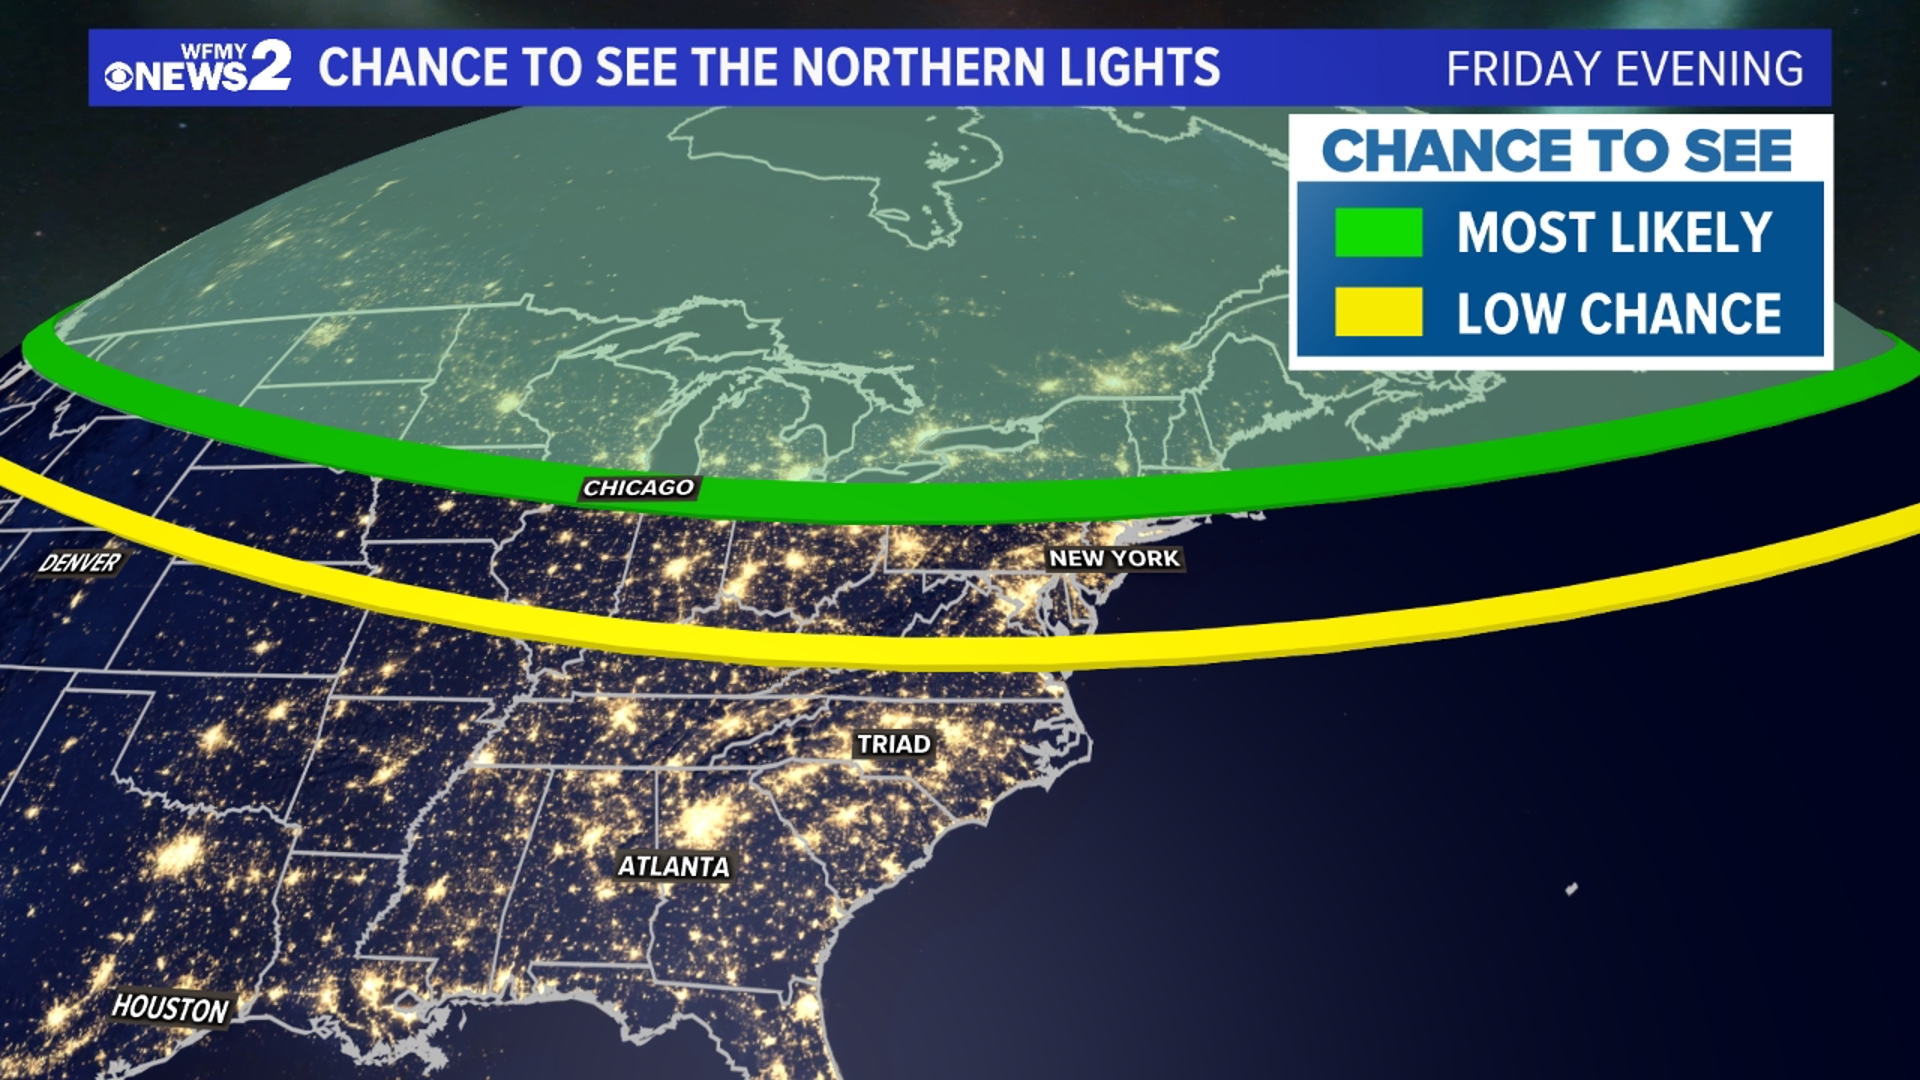 A strong solar storm is triggering visibility farther south for the Northern Lights. Can North Carolina see them?